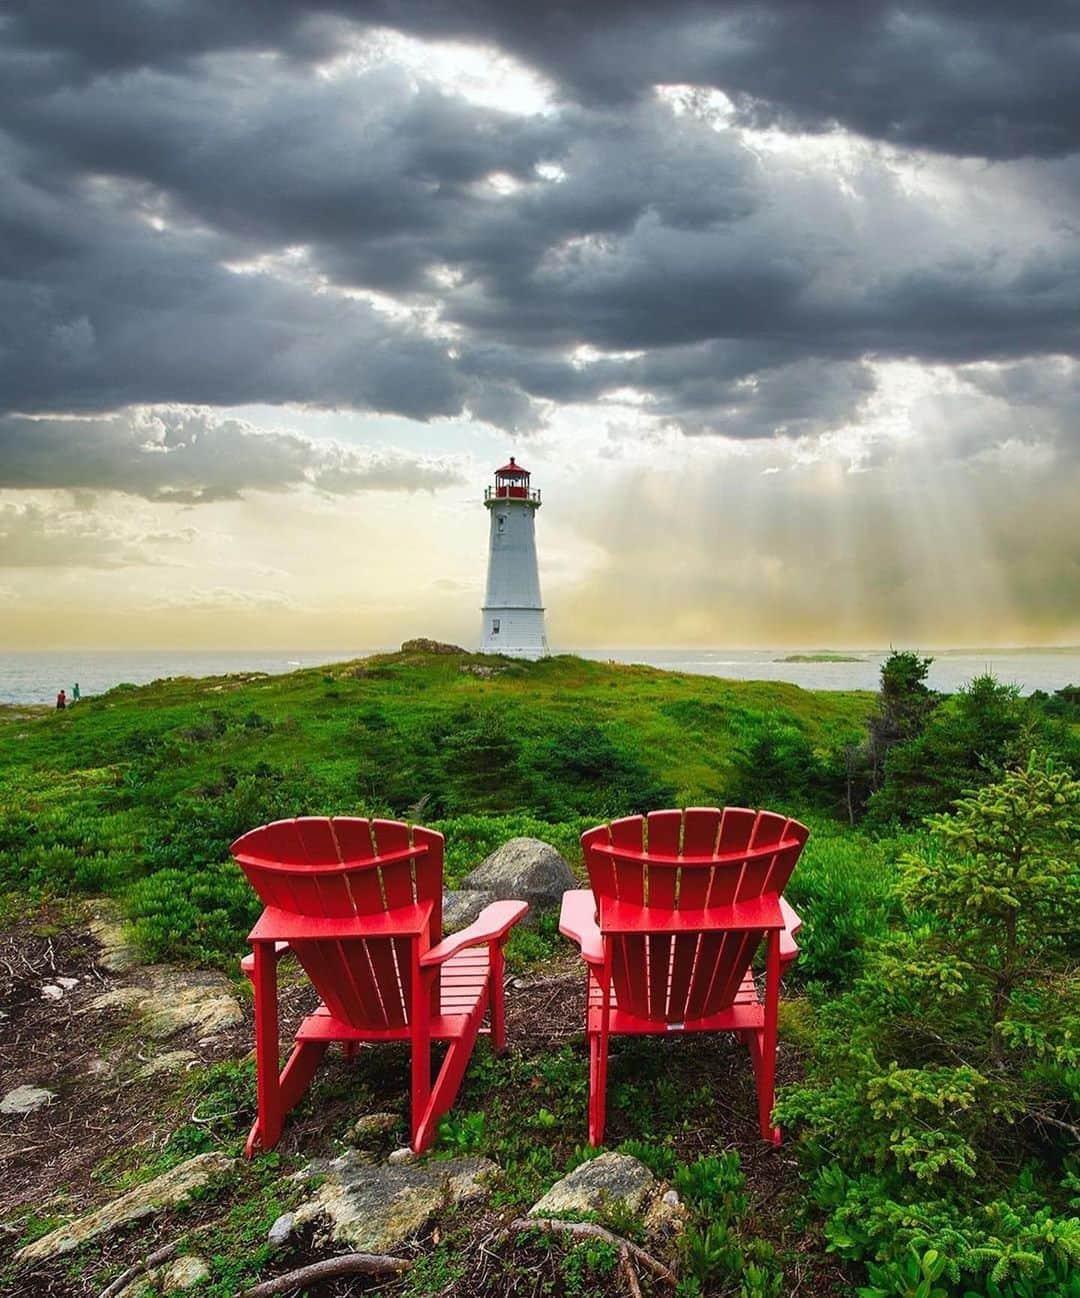 Explore Canadaさんのインスタグラム写真 - (Explore CanadaInstagram)「Today's #CanadaSpotlight is on @discoverhalifax!⁠⠀ ⁠⠀ This picturesque city by the sea is the capital of Nova Scotia and although it might be pretty small, it certainly packs a punch! Here are some of our favourite things to do in Halifax and the surrounding area:⁠⠀ ⁠⠀ ❤️ Stroll along the Halifax Waterfront - a 4km seafront boardwalk where you’ll find yourself making lots of stops to browse boutique shops, watch the boats come and go from the harbour and have a quick nibble or sip at one of the many bars and restaurants.⁠⠀ 💙 Explore the Citadel Hill National Historic Site. Positioned atop a grassy slope, this star-shaped fort overlooks the city and is home to some fascinating historical exhibits including barracks, the guard’s room and the gunpowder magazines. ⁠⠀ 💛 Photograph the colourful houses in the North End, before enjoying some delicious, locally sourced, seasonal food in one of the popular restaurants in the neighbourhood.⁠⠀ 💚 Hop on a ferry over to McNabs Island for the day. Here, you can explore over 22km of hiking trails and take in the fresh air and epic forest and coastal landscapes. It’s also a great spot to go birding, with over 206 different bird species that can be spotted from the island!⁠⠀ ⁠⠀ For more information and beautiful photos of Halifax, head over to @discoverhalifax! If you’re local to Nova Scotia, be sure to also check out their great guides and itineraries in their story highlights. ⁠⠀ ⁠⠀ #ExploreCanada #ForGlowingHearts⁠⠀ ⁠⠀ 📷:⁠⠀ ⁠⠀ 1. @visitnovascotia & Scott Munn⁠⠀ 2&3. @discoverhalifax & J. Ingram⁠⠀ 4. @flyzone⁠⠀ 5. @jsn.ptrsn⁠⠀ 6. @ce.desrochers⁠⠀ 7. @realtygeek⁠⠀ 8. Celtic Colours International Festival⁠⠀ ⁠⠀ 📍: @discoverhalifax⁠⠀ ⁠⠀ #HeartSoulHalifax⁠⠀」8月15日 0時17分 - explorecanada